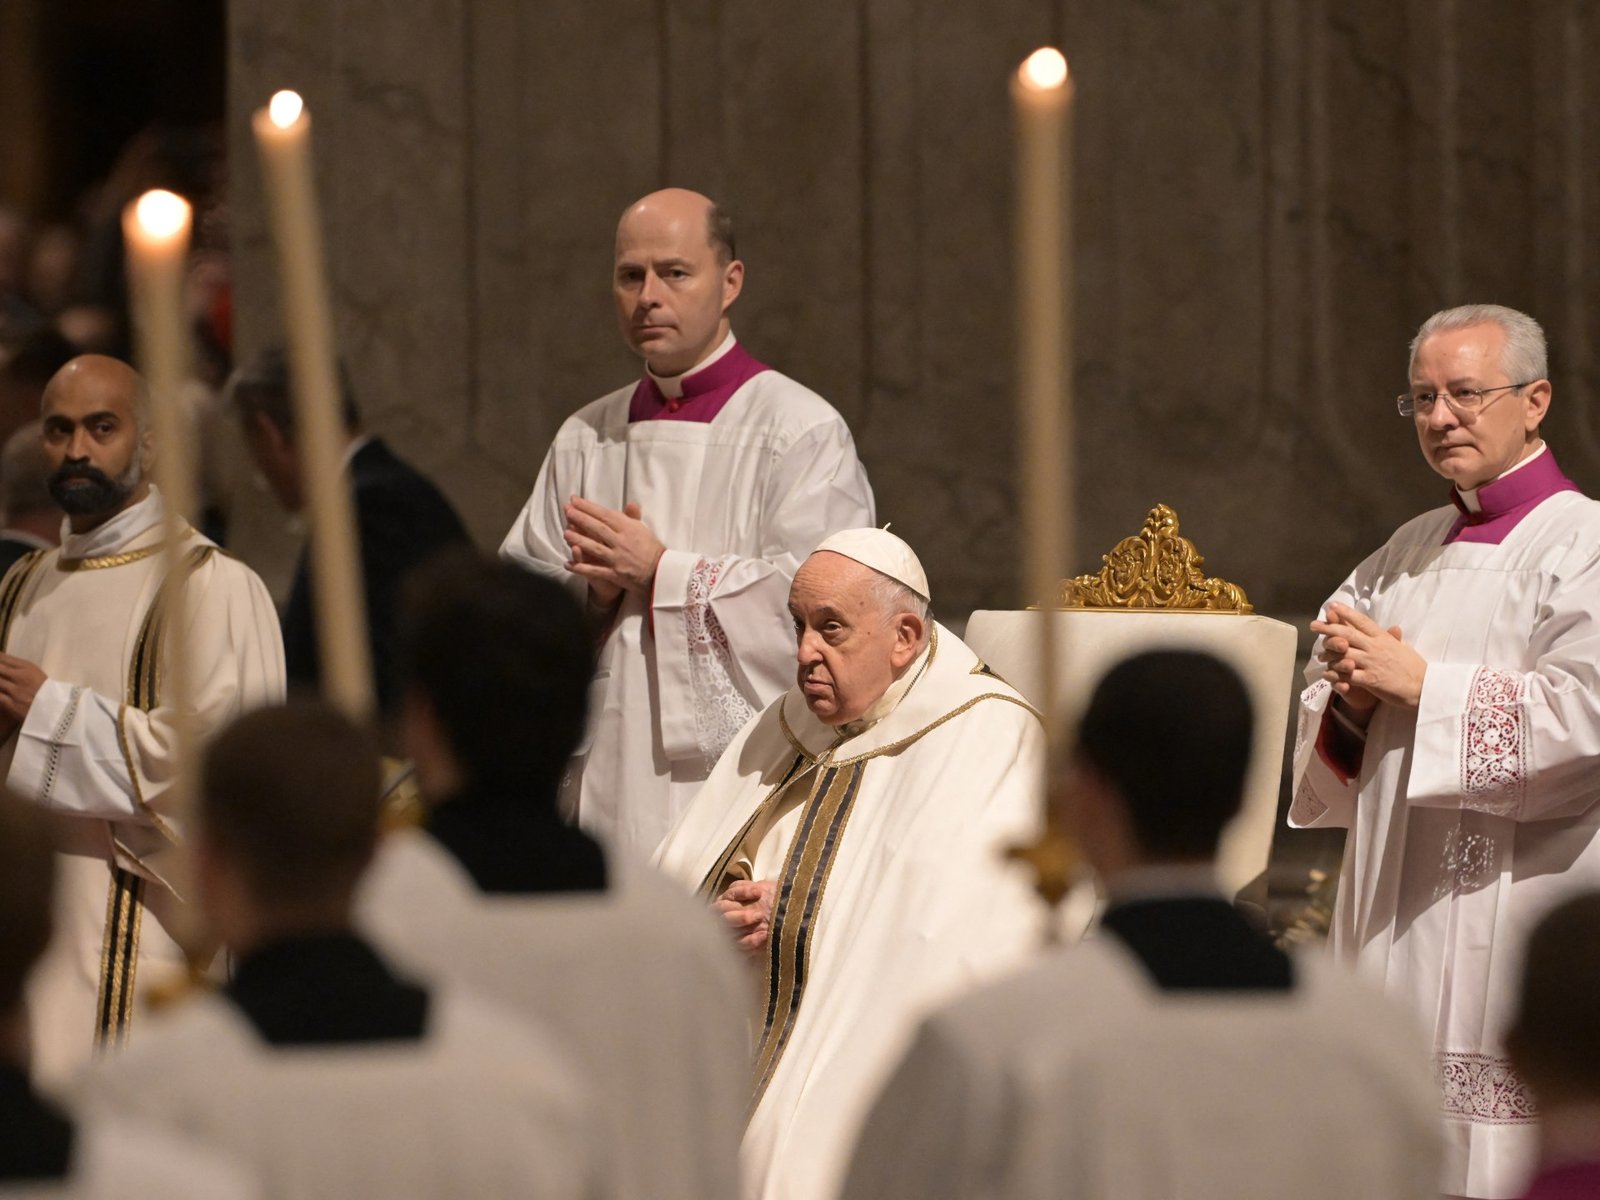 ‘Our hearts in Bethlehem’, says Pope in Christmas Eve mass, shadowed by war | Israel-Palestine conflict News